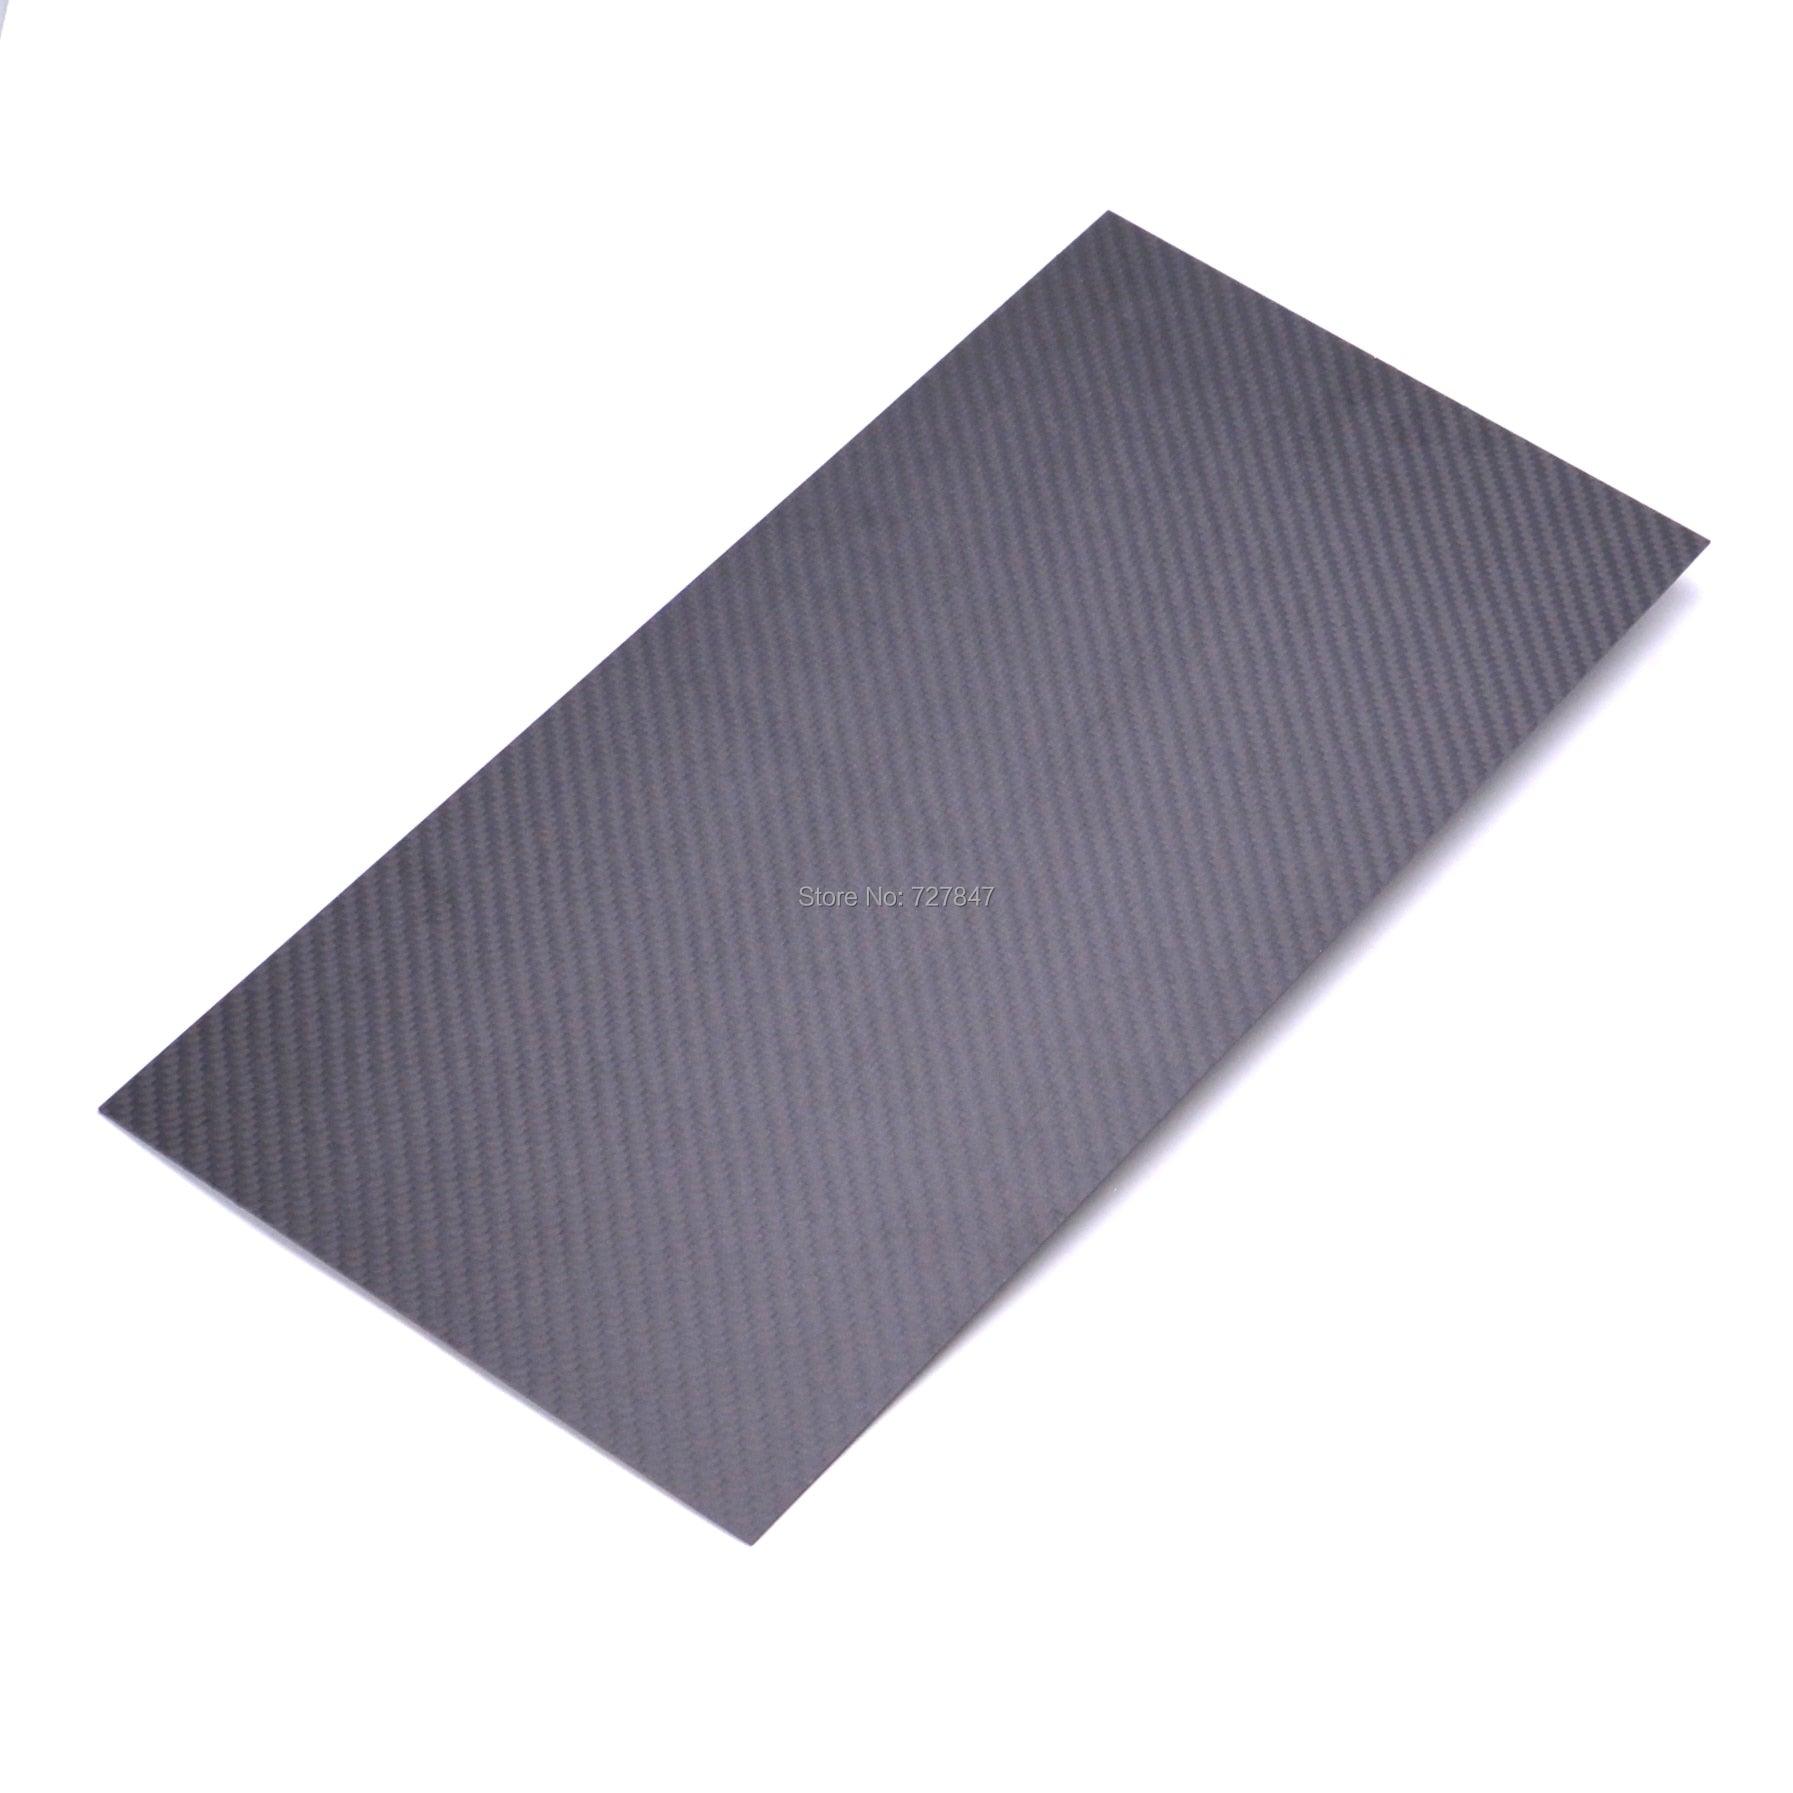 400mm X 200mm Real Carbon Fiber Plate Panel Sheets 0.5mm 1mm 1.5mm 2mm 3mm 4mm 5mm Thickness Composite Hardness Material - RCDrone